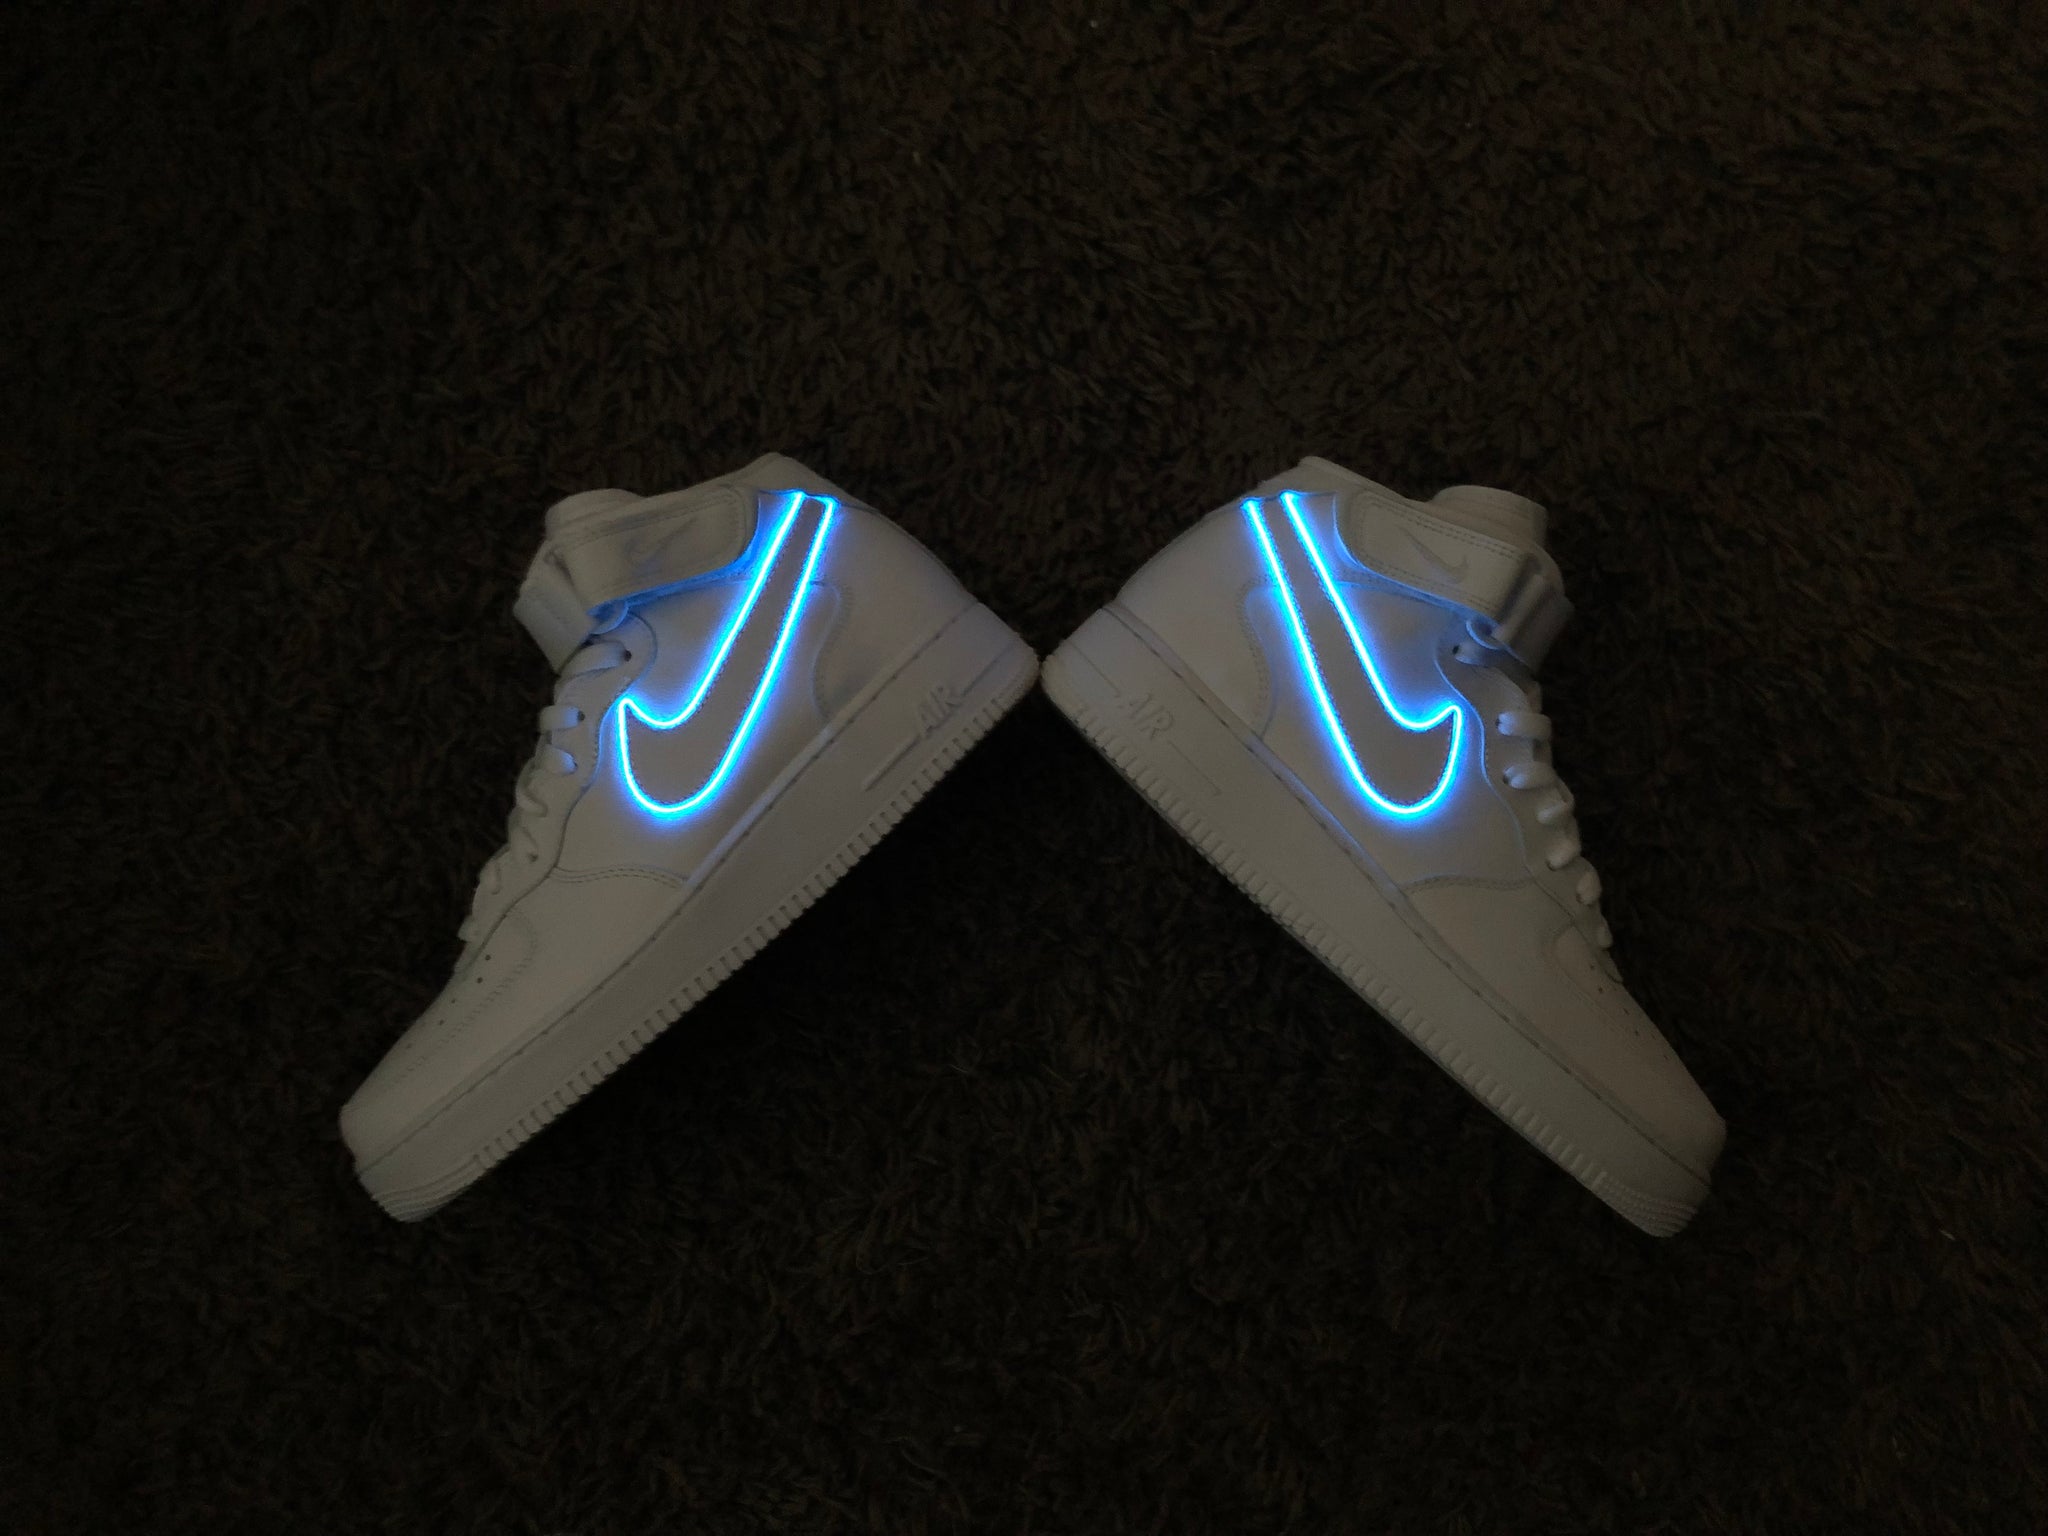 White Nike Air Force Mid 1 Light Up Shoes 10 Colors of Light Upgrade